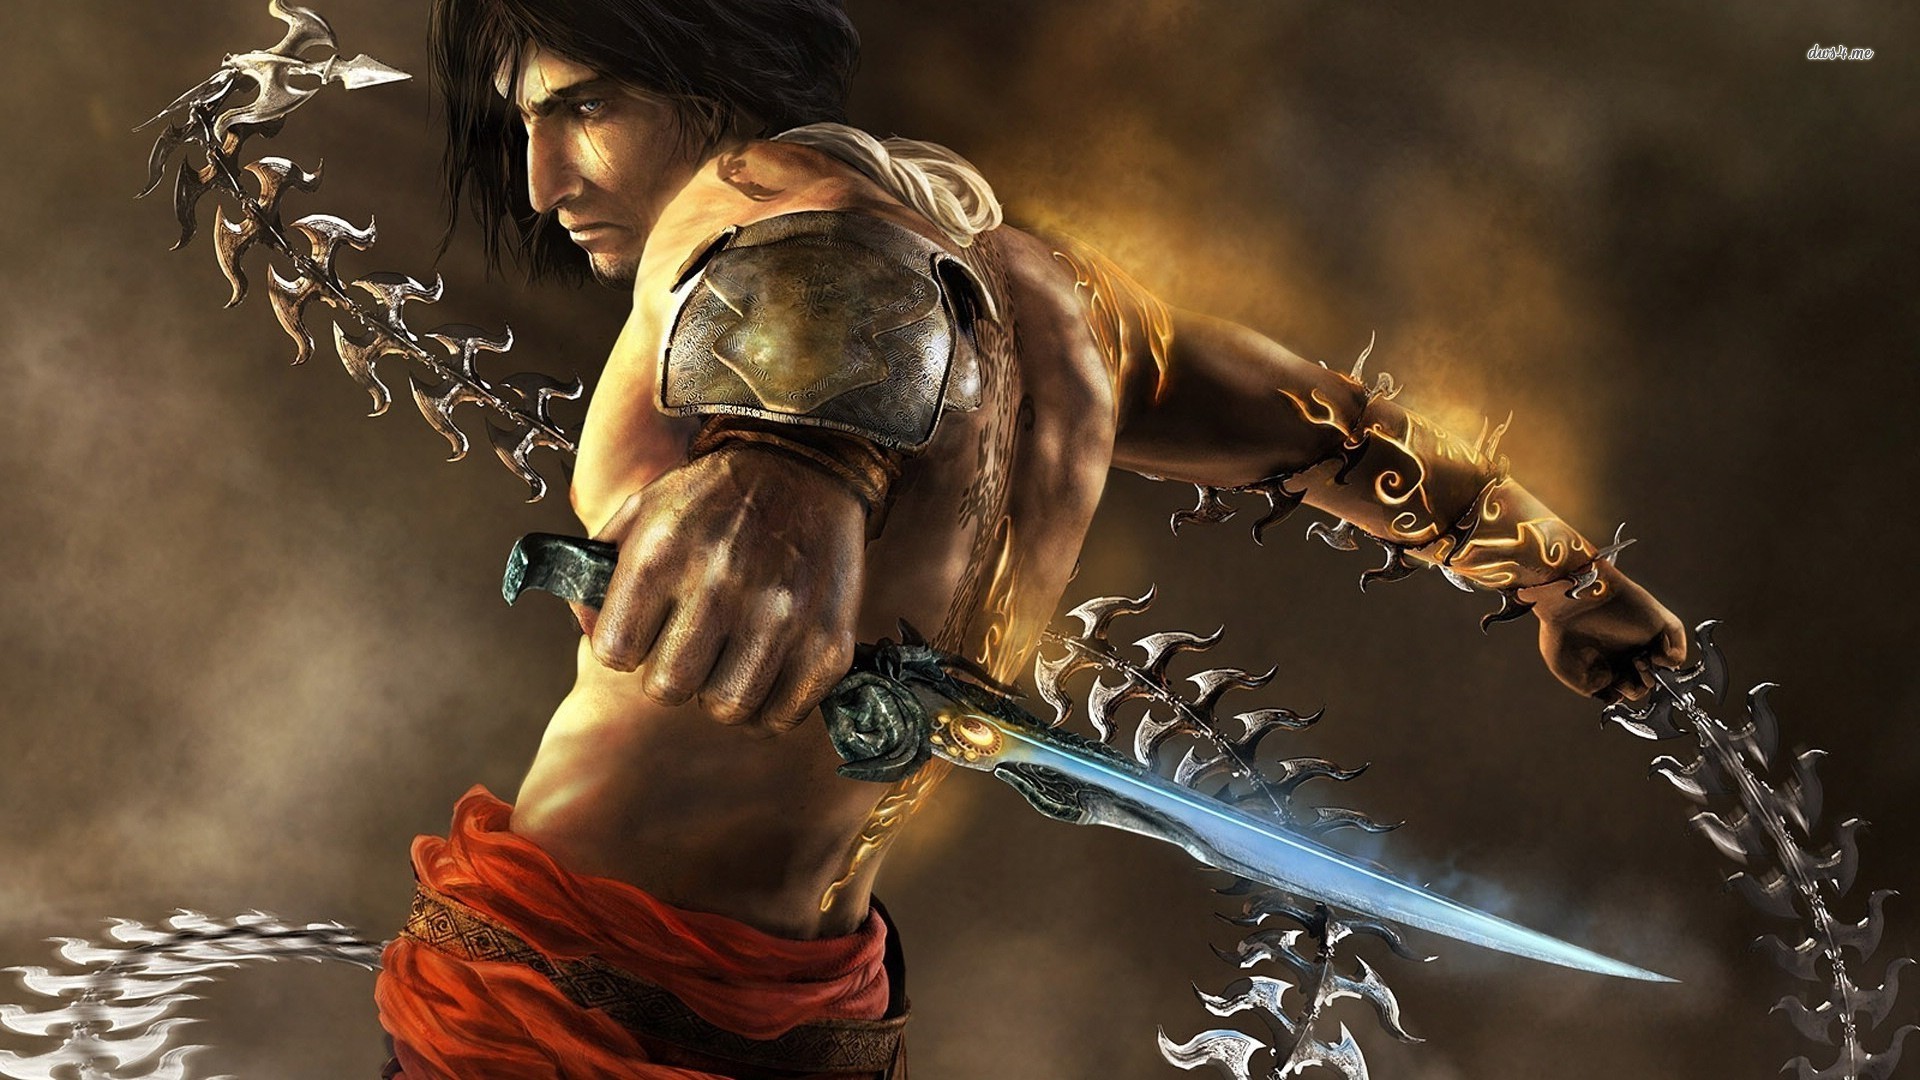 Prince of Persia Warrior Within Wallpaper (57+ images)